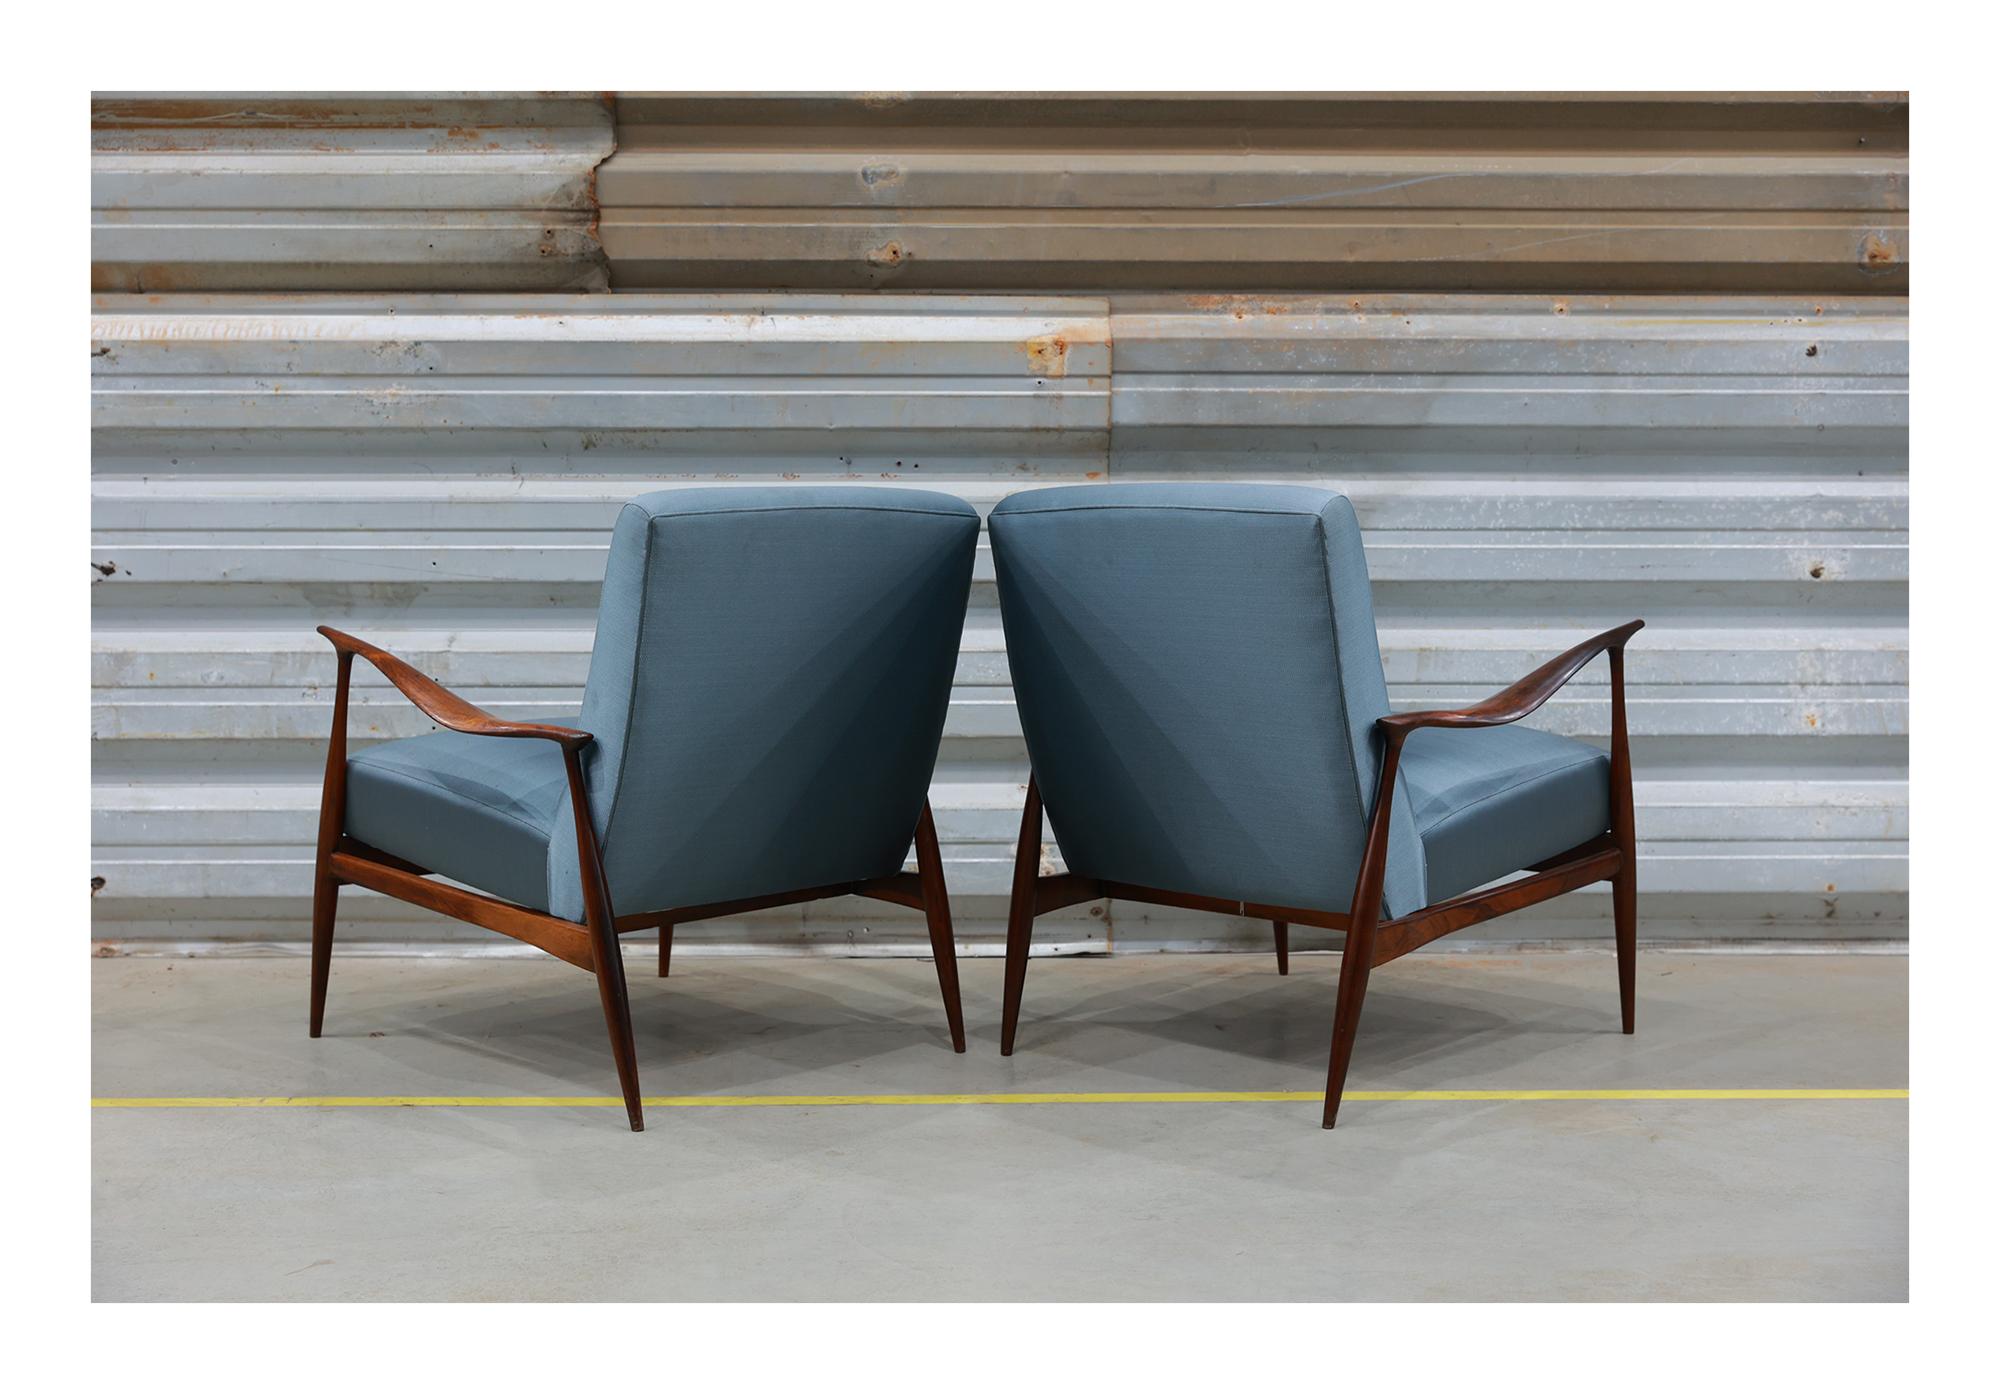 20th Century Brazilian Modern Armchairs in Hardwood and Blue Fabric, Giuseppe Scapinelli